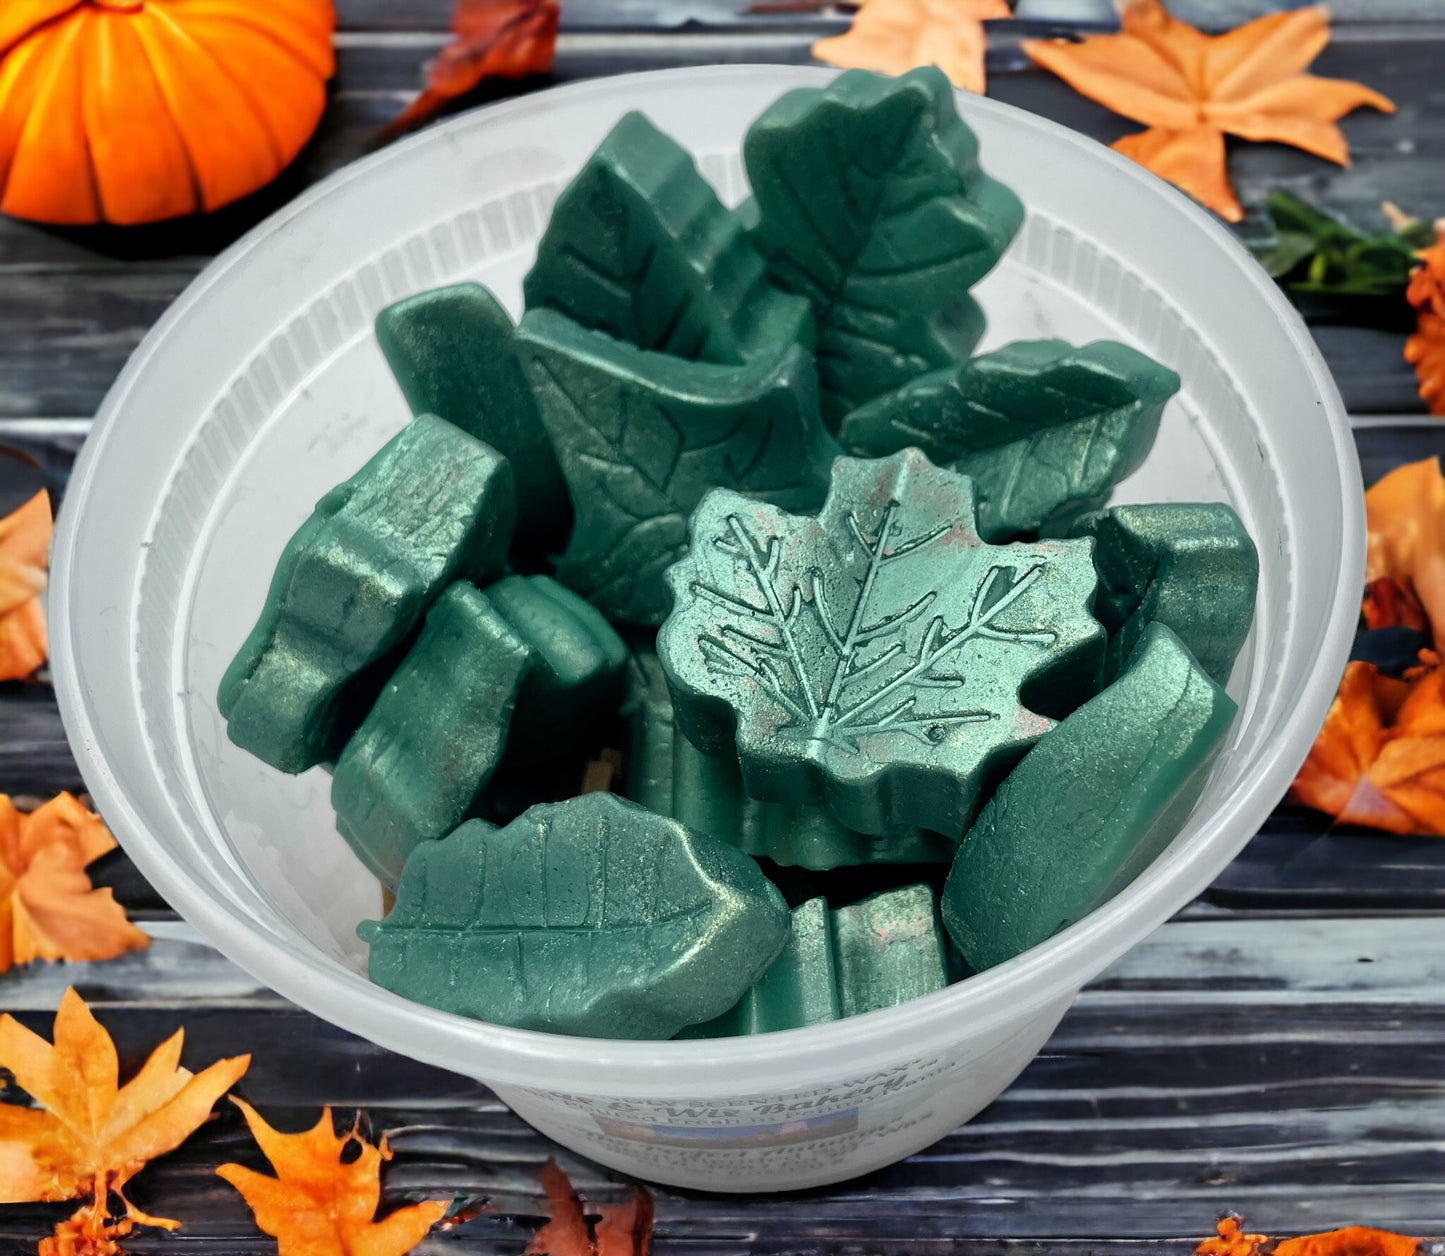 Leaves Wax Melts. The Perfect Autumn. 6 Oz. Soy Wax Melts/Leaf Shaped/Strongly Scented Wax Melts/Wax Tarts for Wax Warmers/Fall Wax Melts